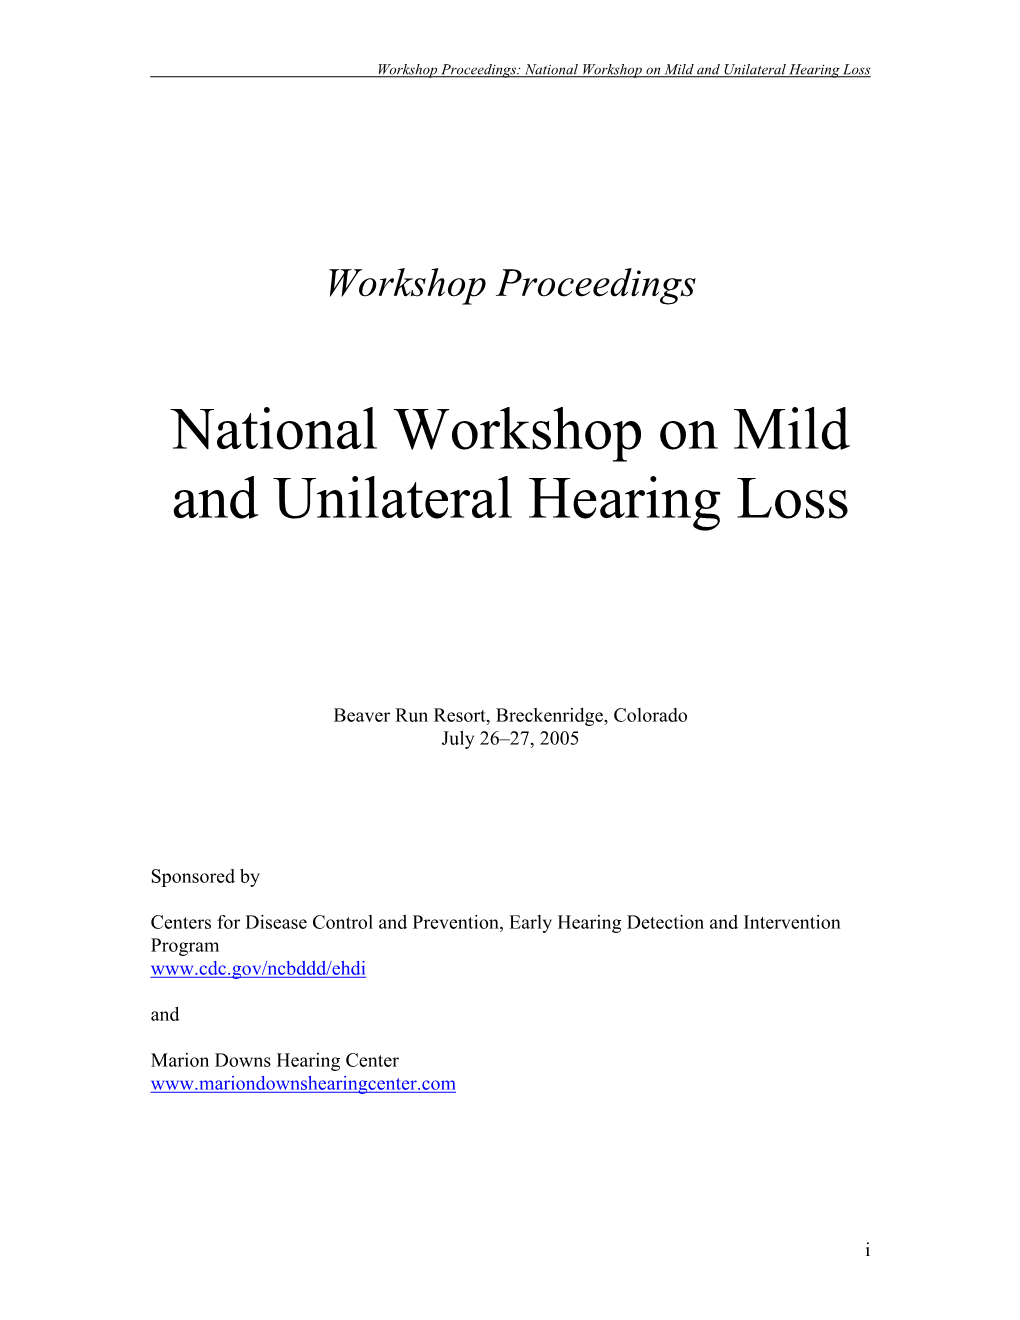 National Workshop on Mild and Unilateral Hearing Loss